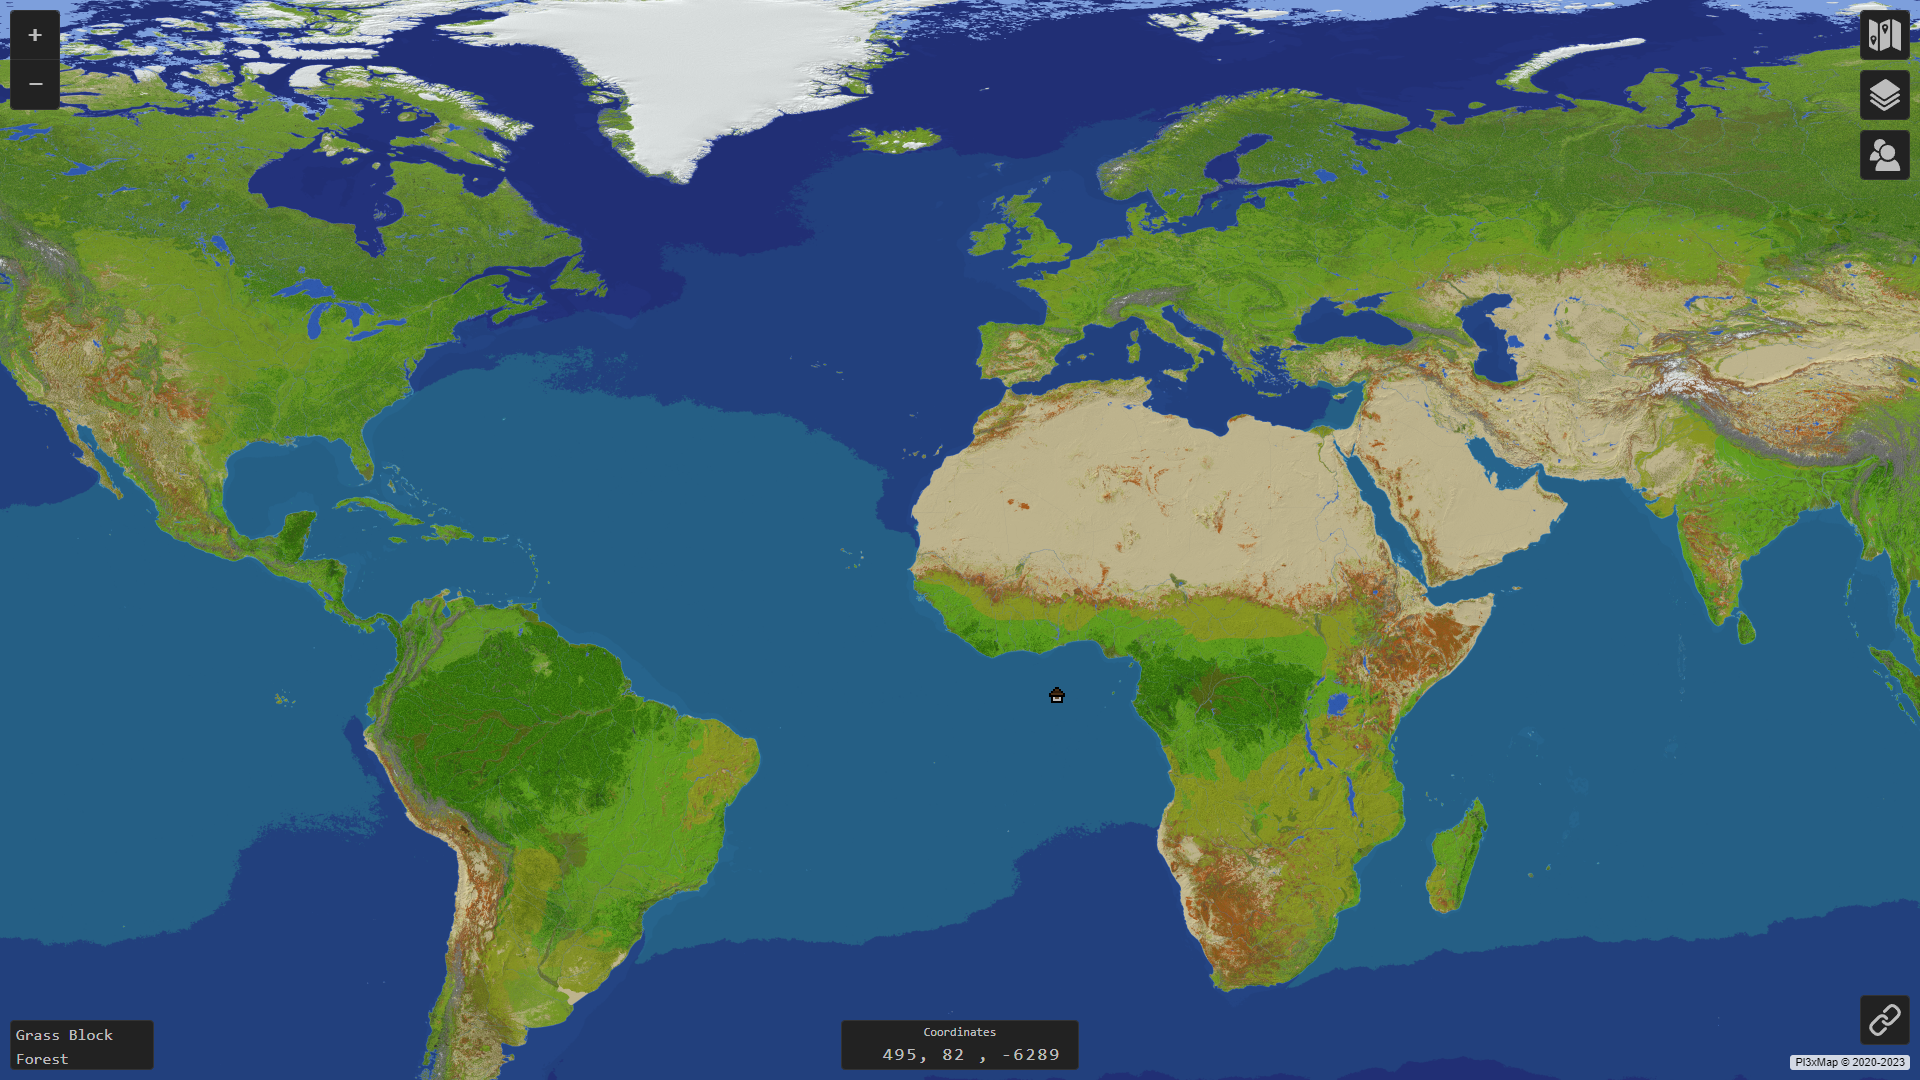 Testing speed of the notorious earth maps. This one is 1:750 scale and took about 15 minutes to fully render.